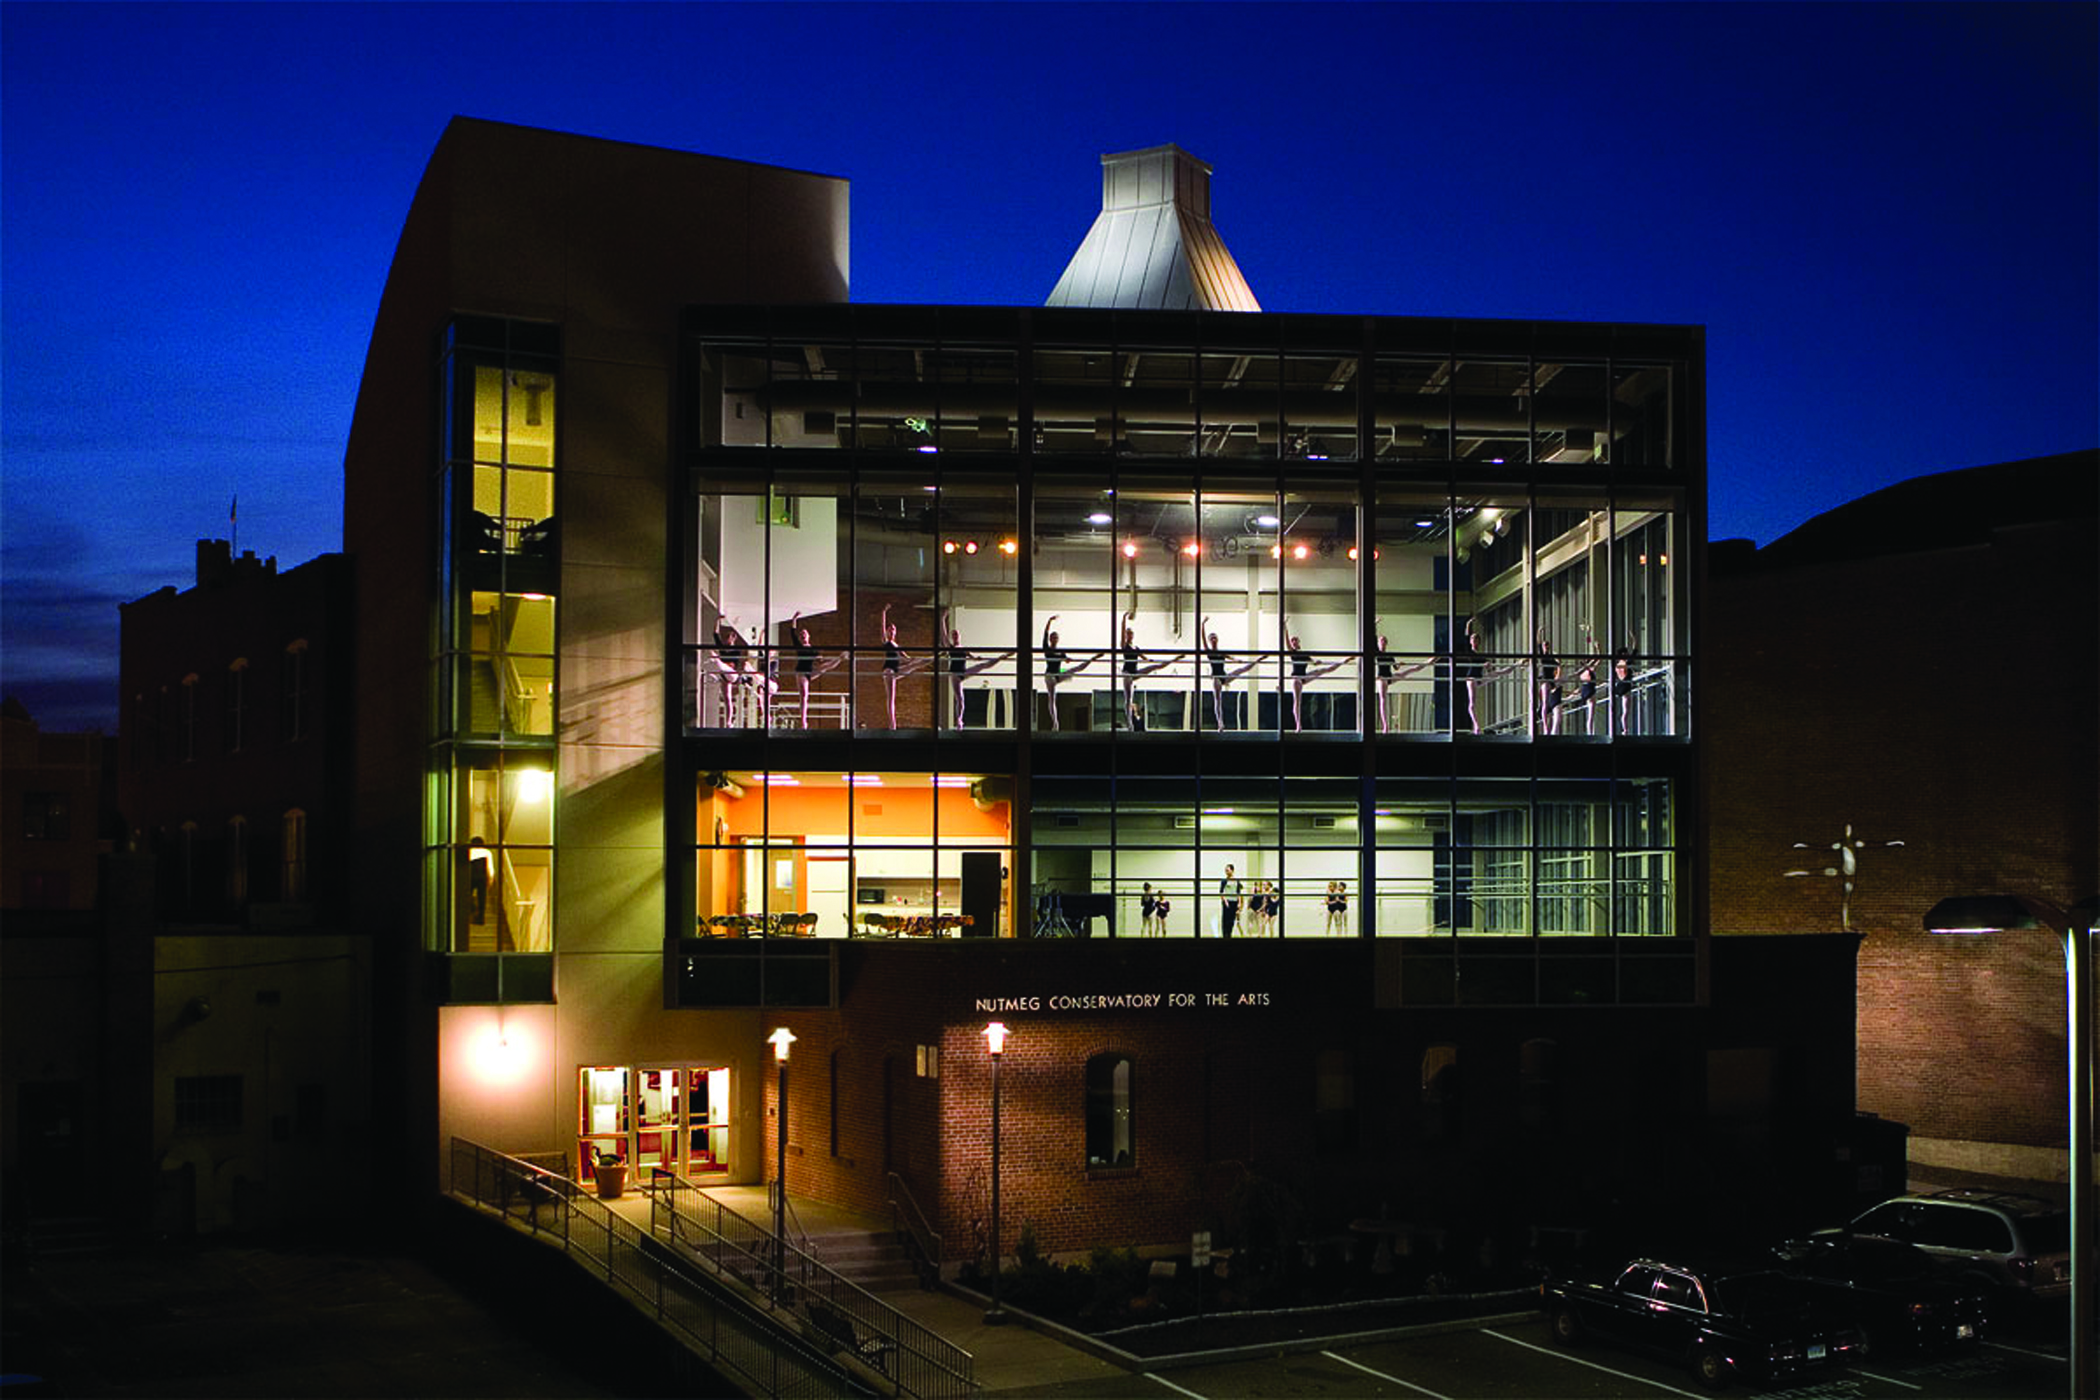 Nutmeg Conservatory's dance studios seen from outside at night. Ballet dancers are seen through the windows in two studios across two floors.